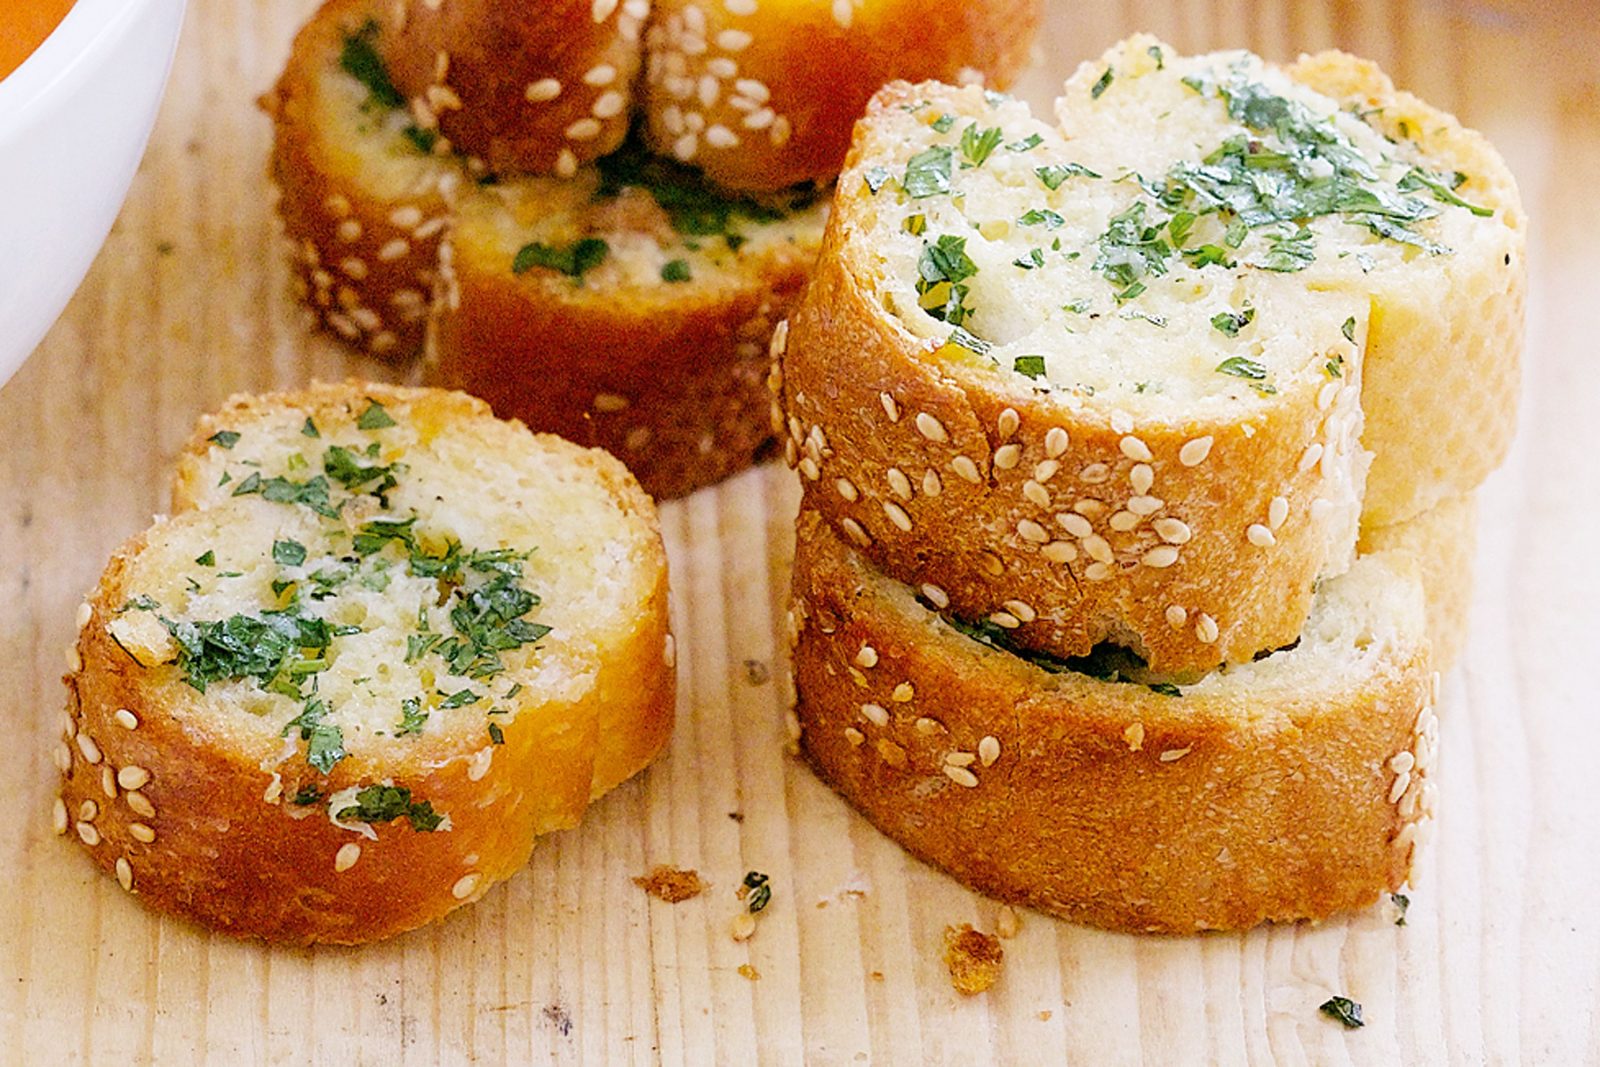 We Know Your Exact Age Based on the Foods You Love and Hate Garlic bread